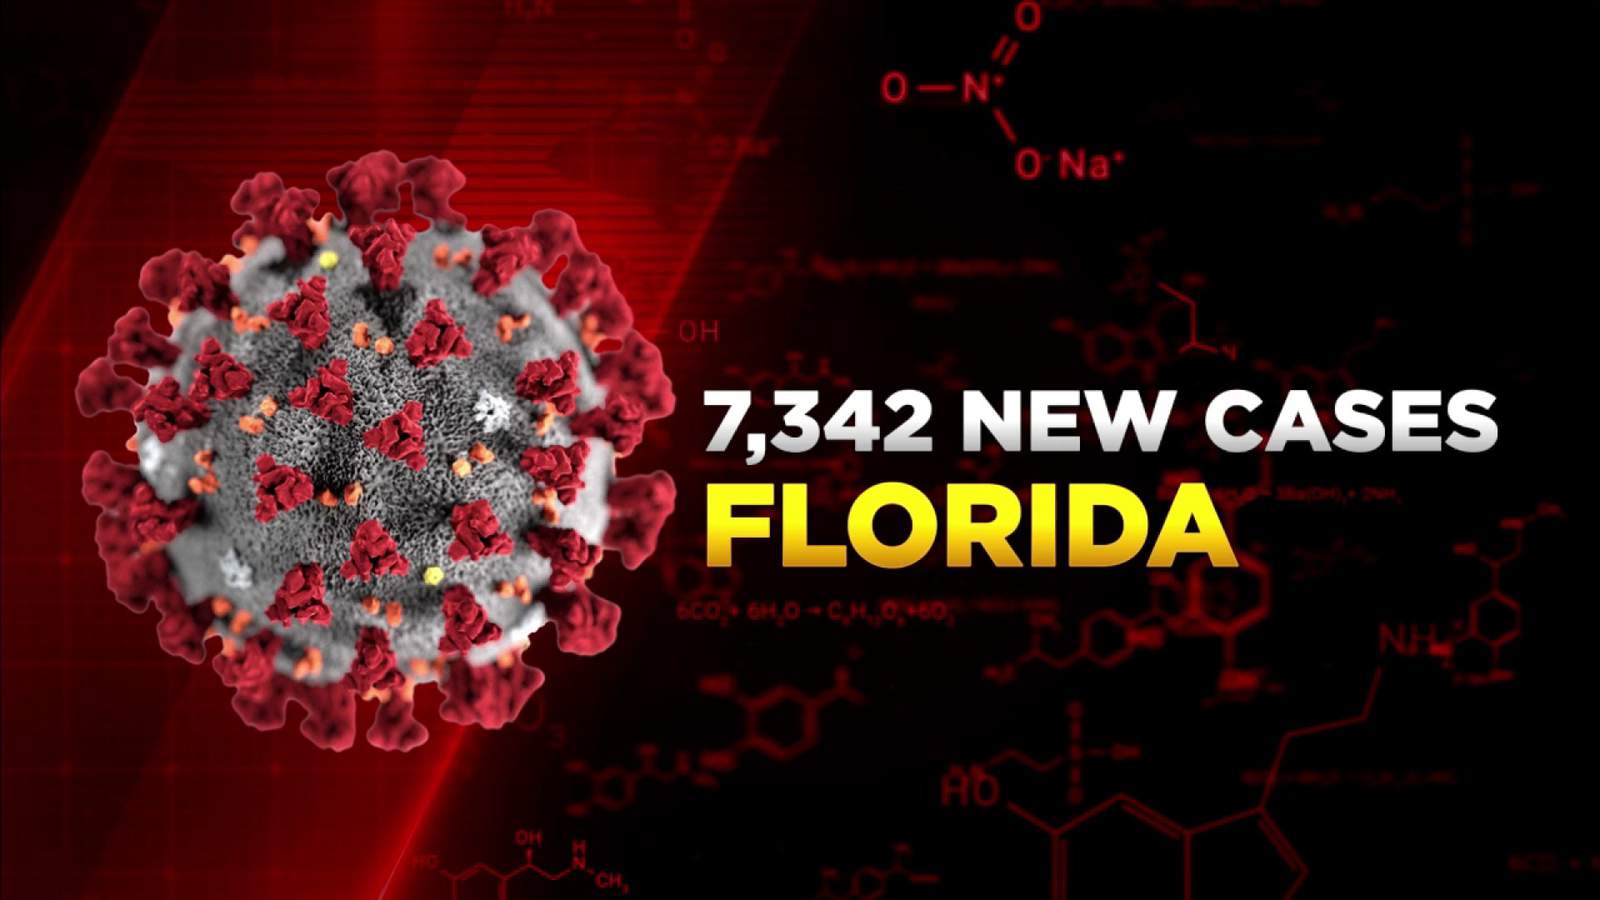 Florida reports 7,342 new COVID-19 cases, 157 more resident deaths Wednesday